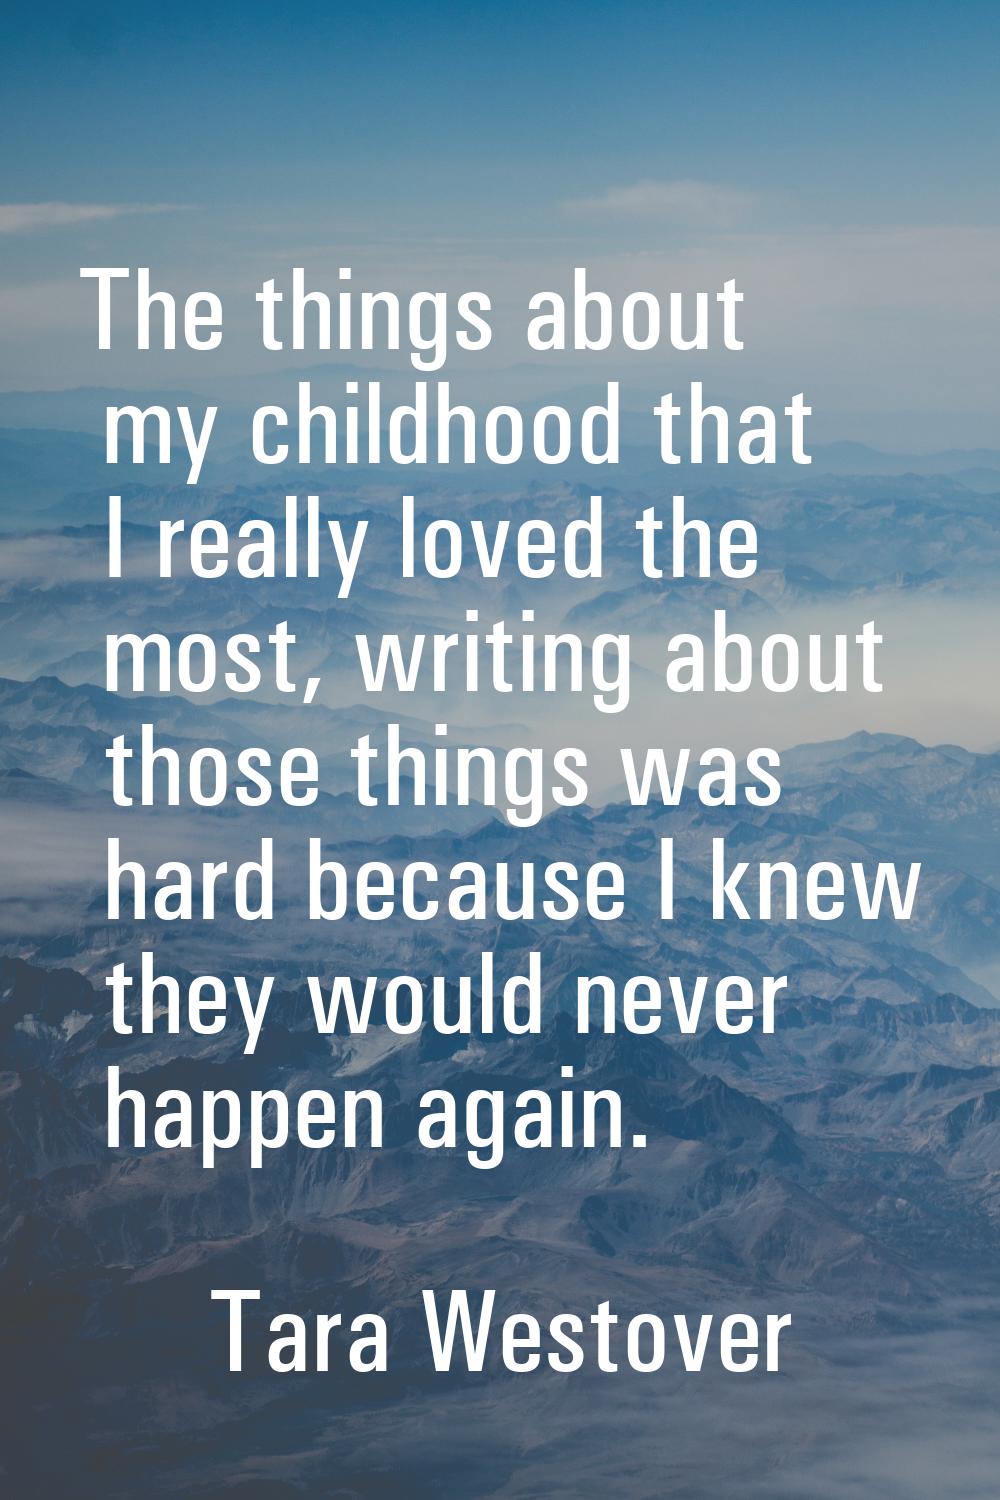 The things about my childhood that I really loved the most, writing about those things was hard bec